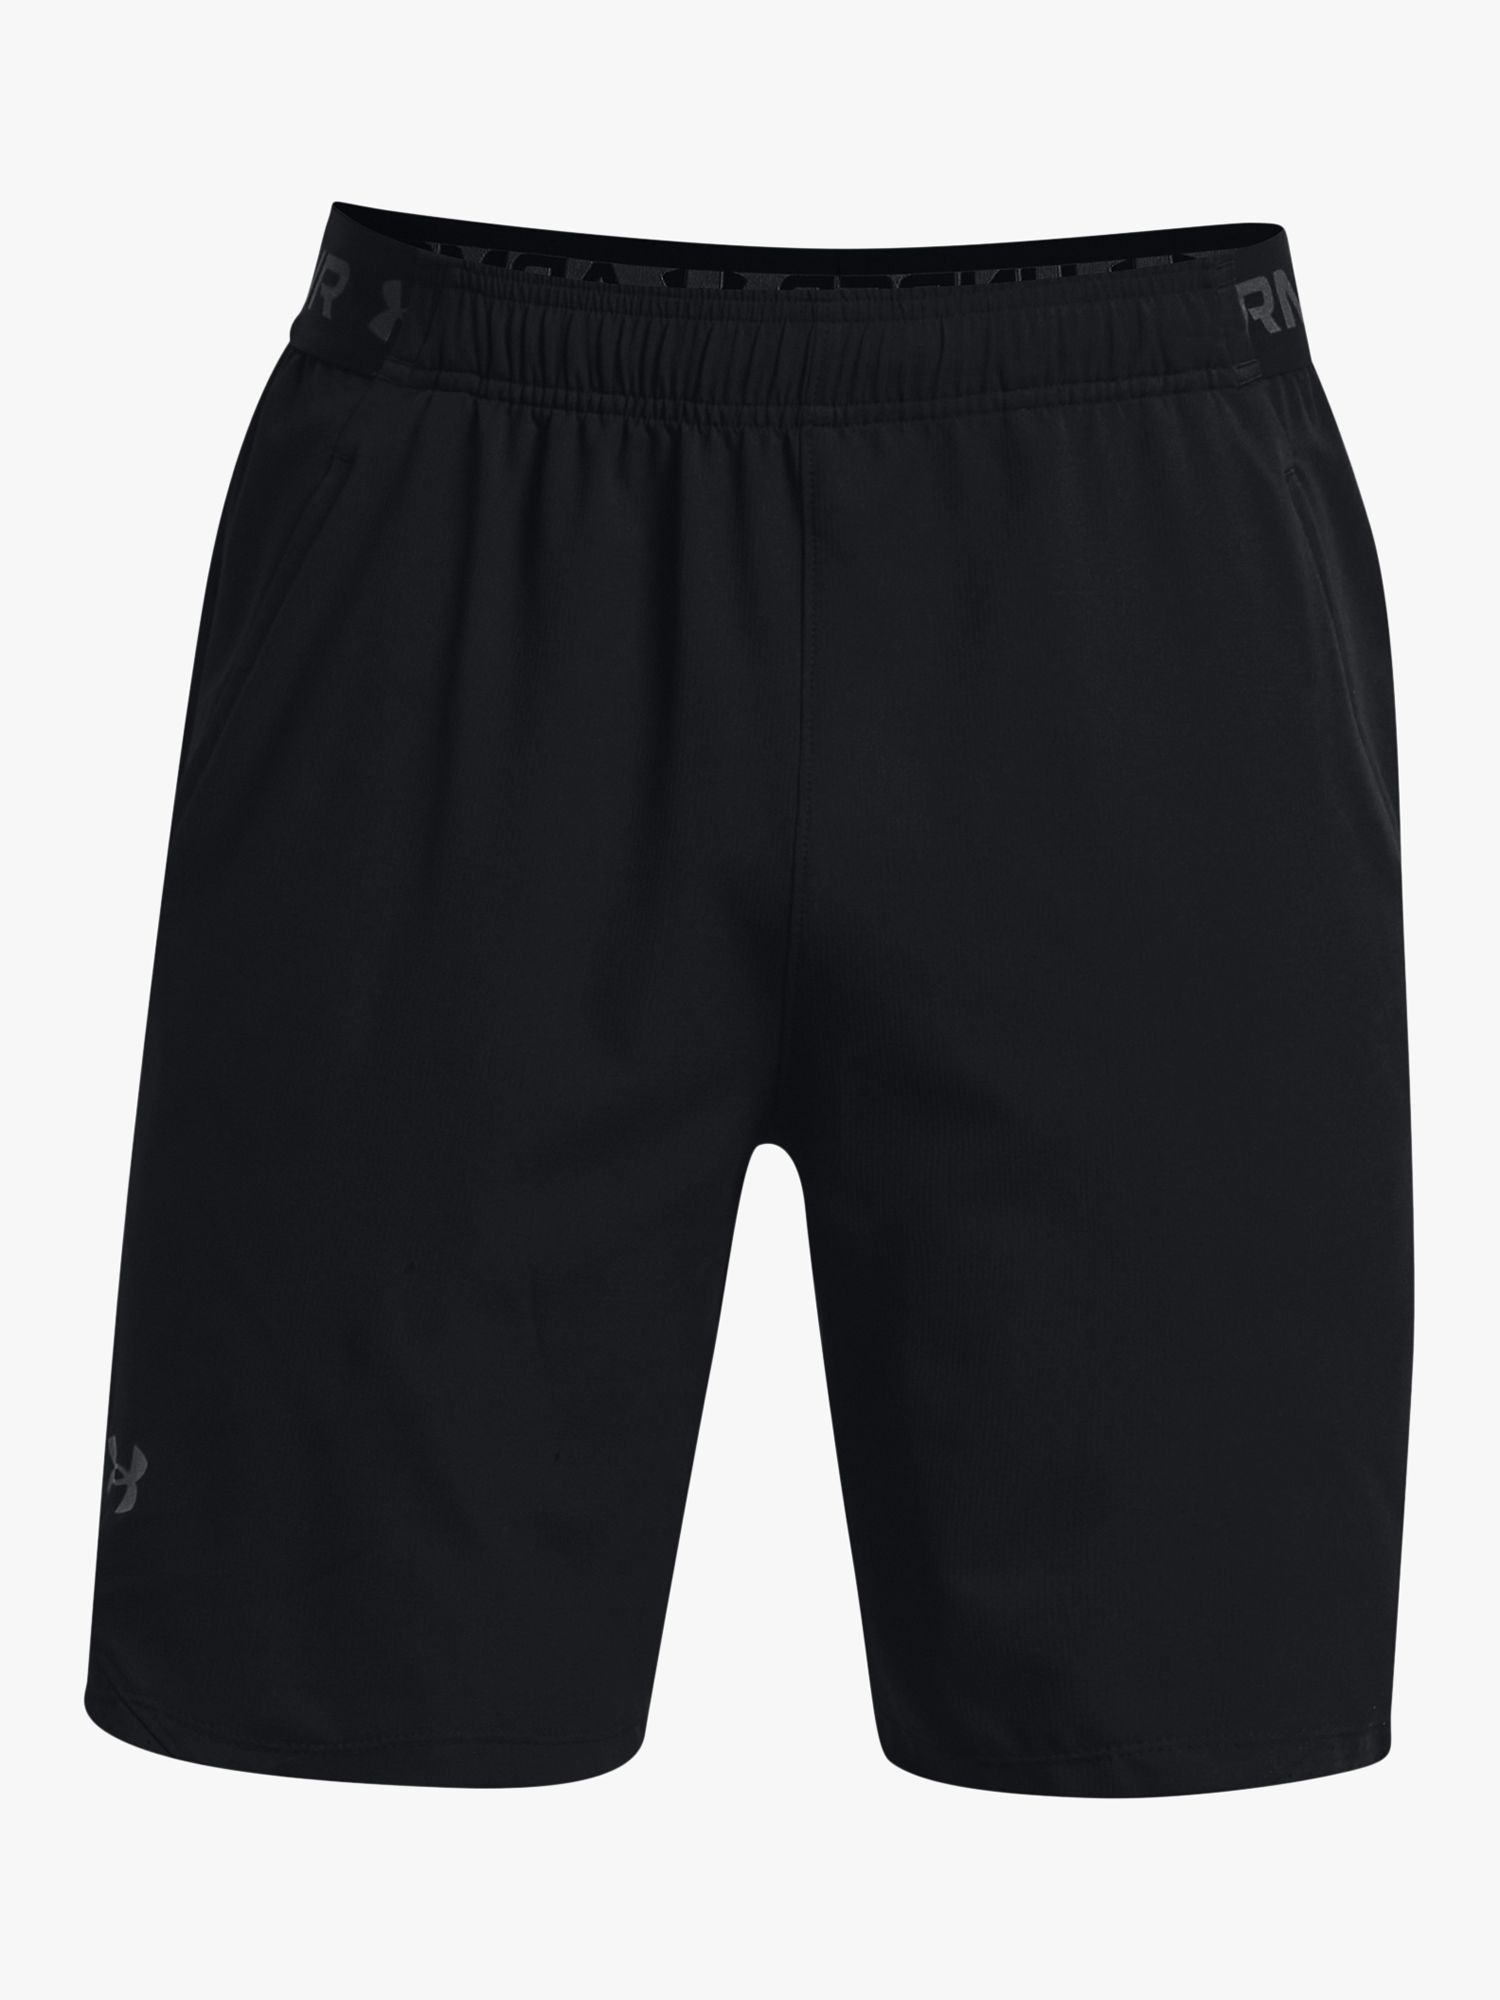 Under Armour Vanish Woven Gym Shorts, Black/Pitch Gray, S